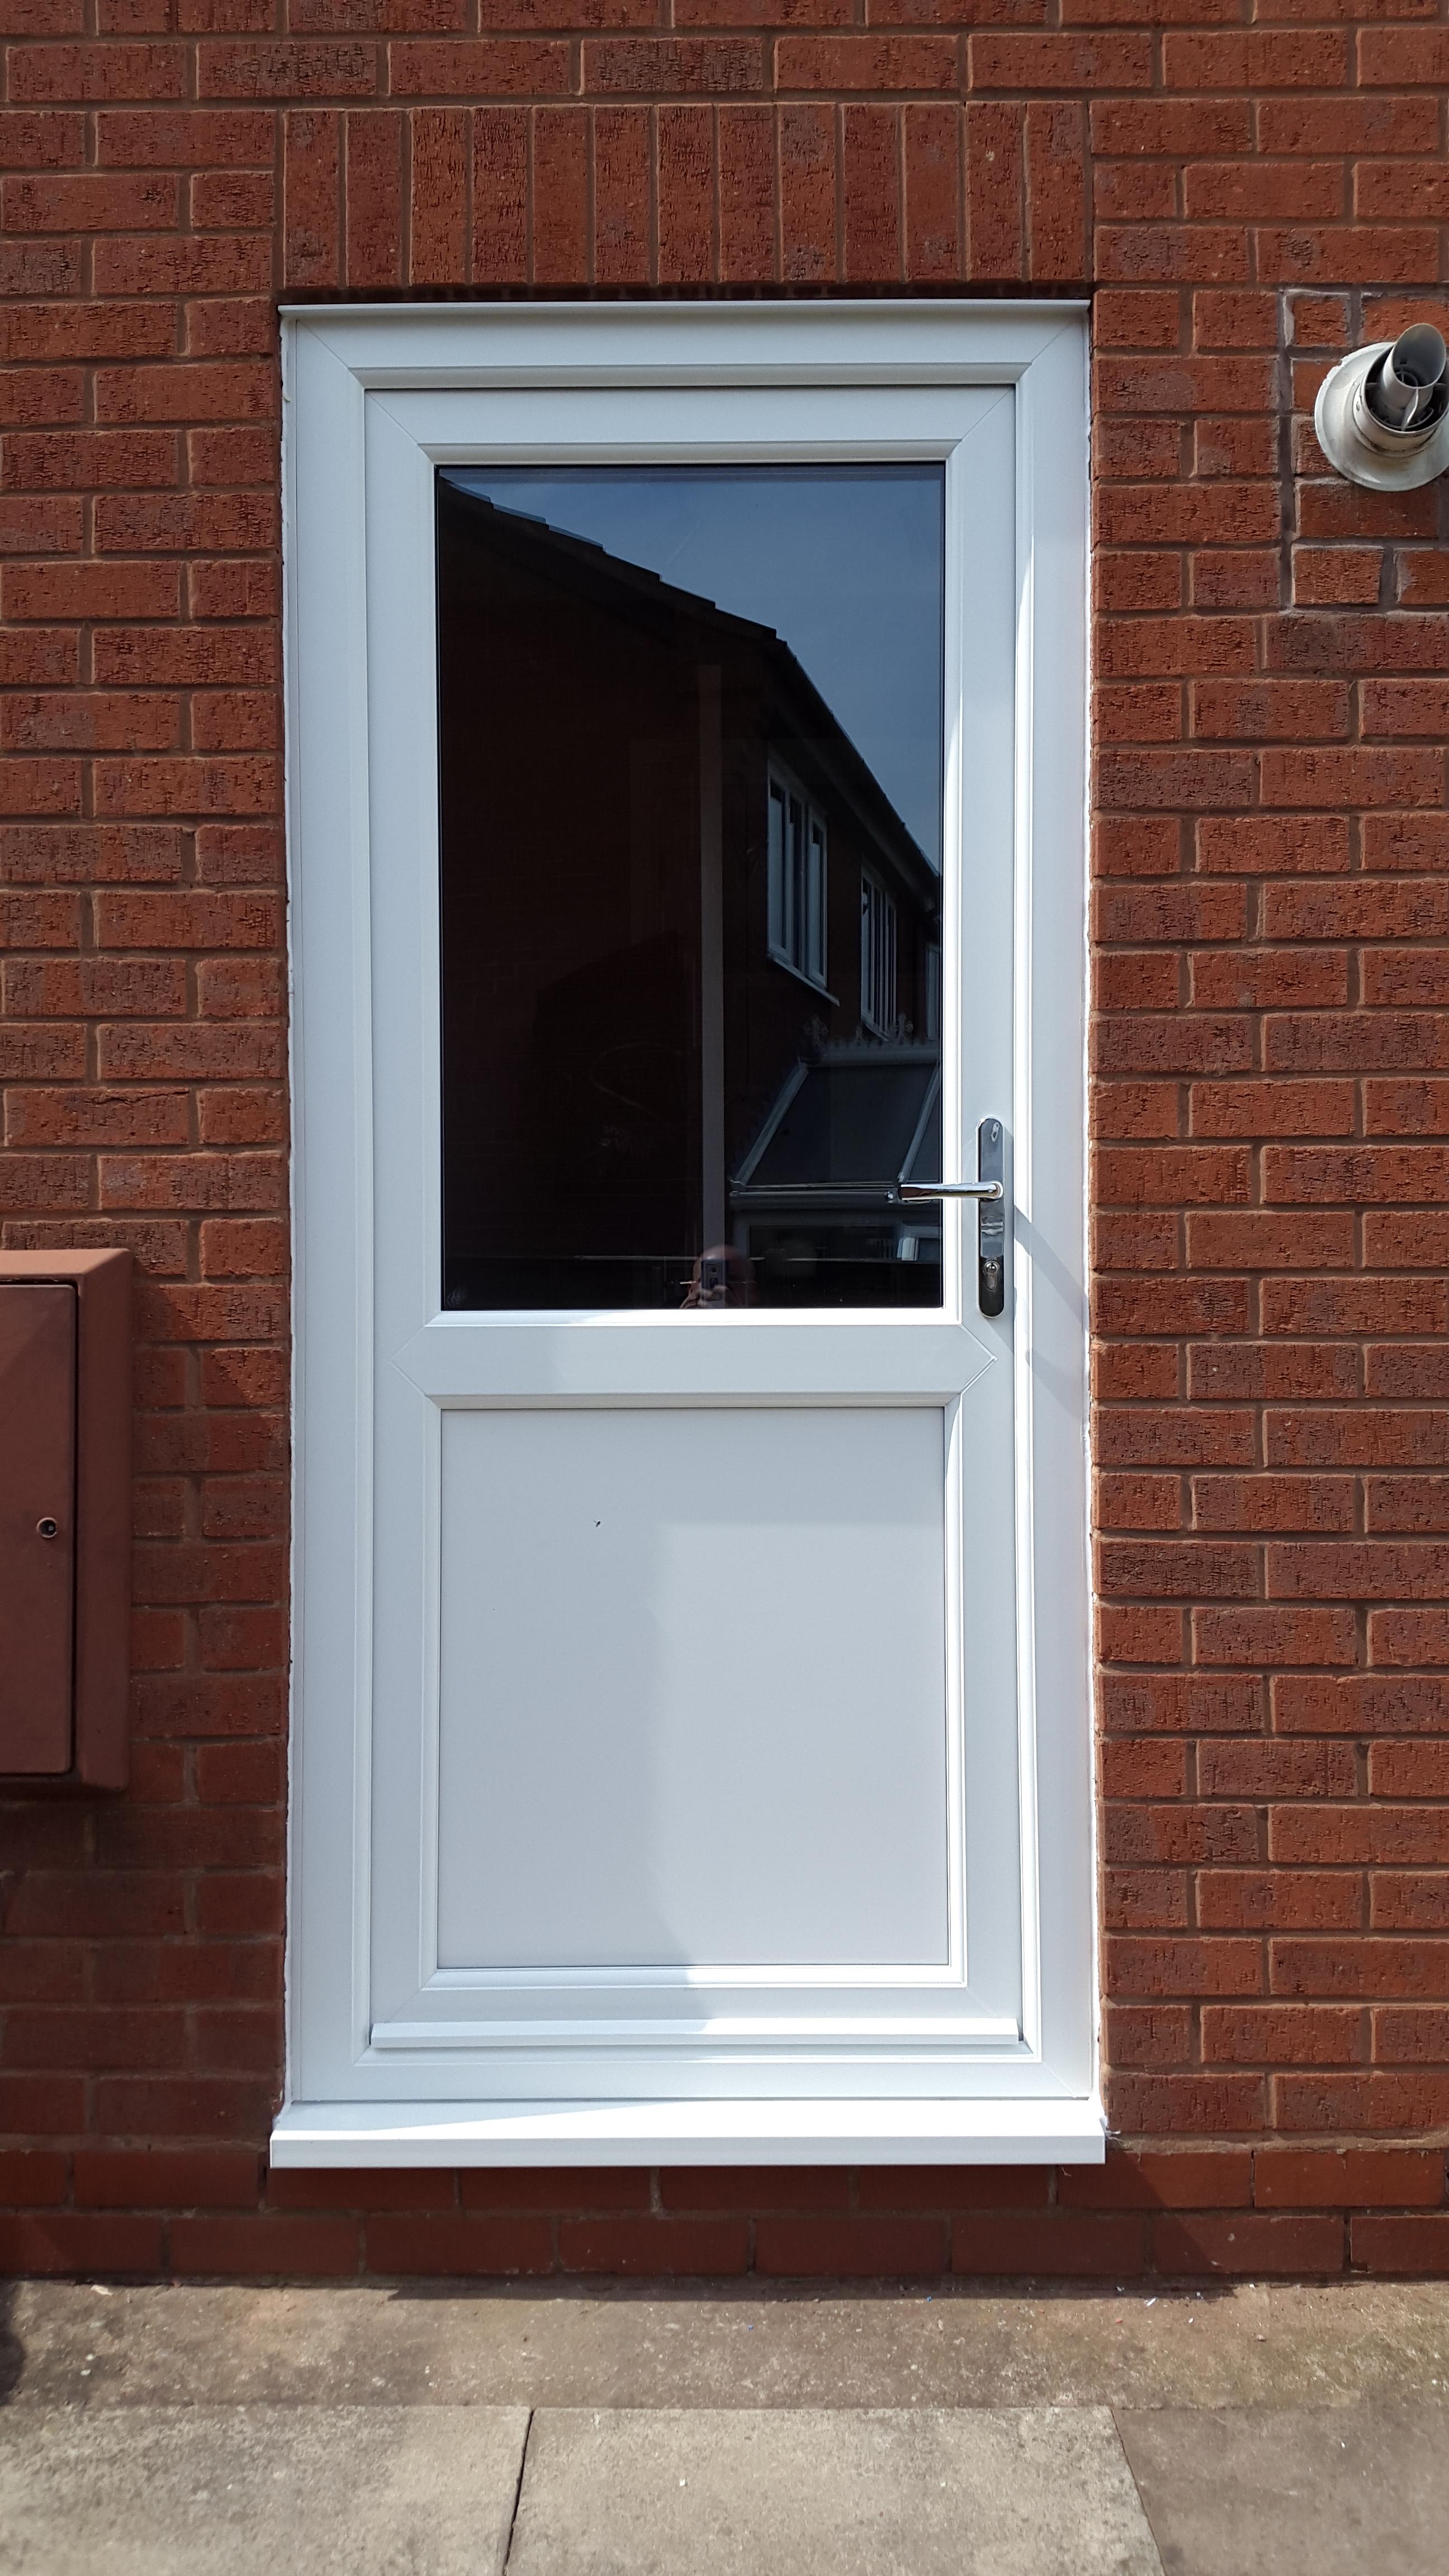 How much does a new upvc door cost